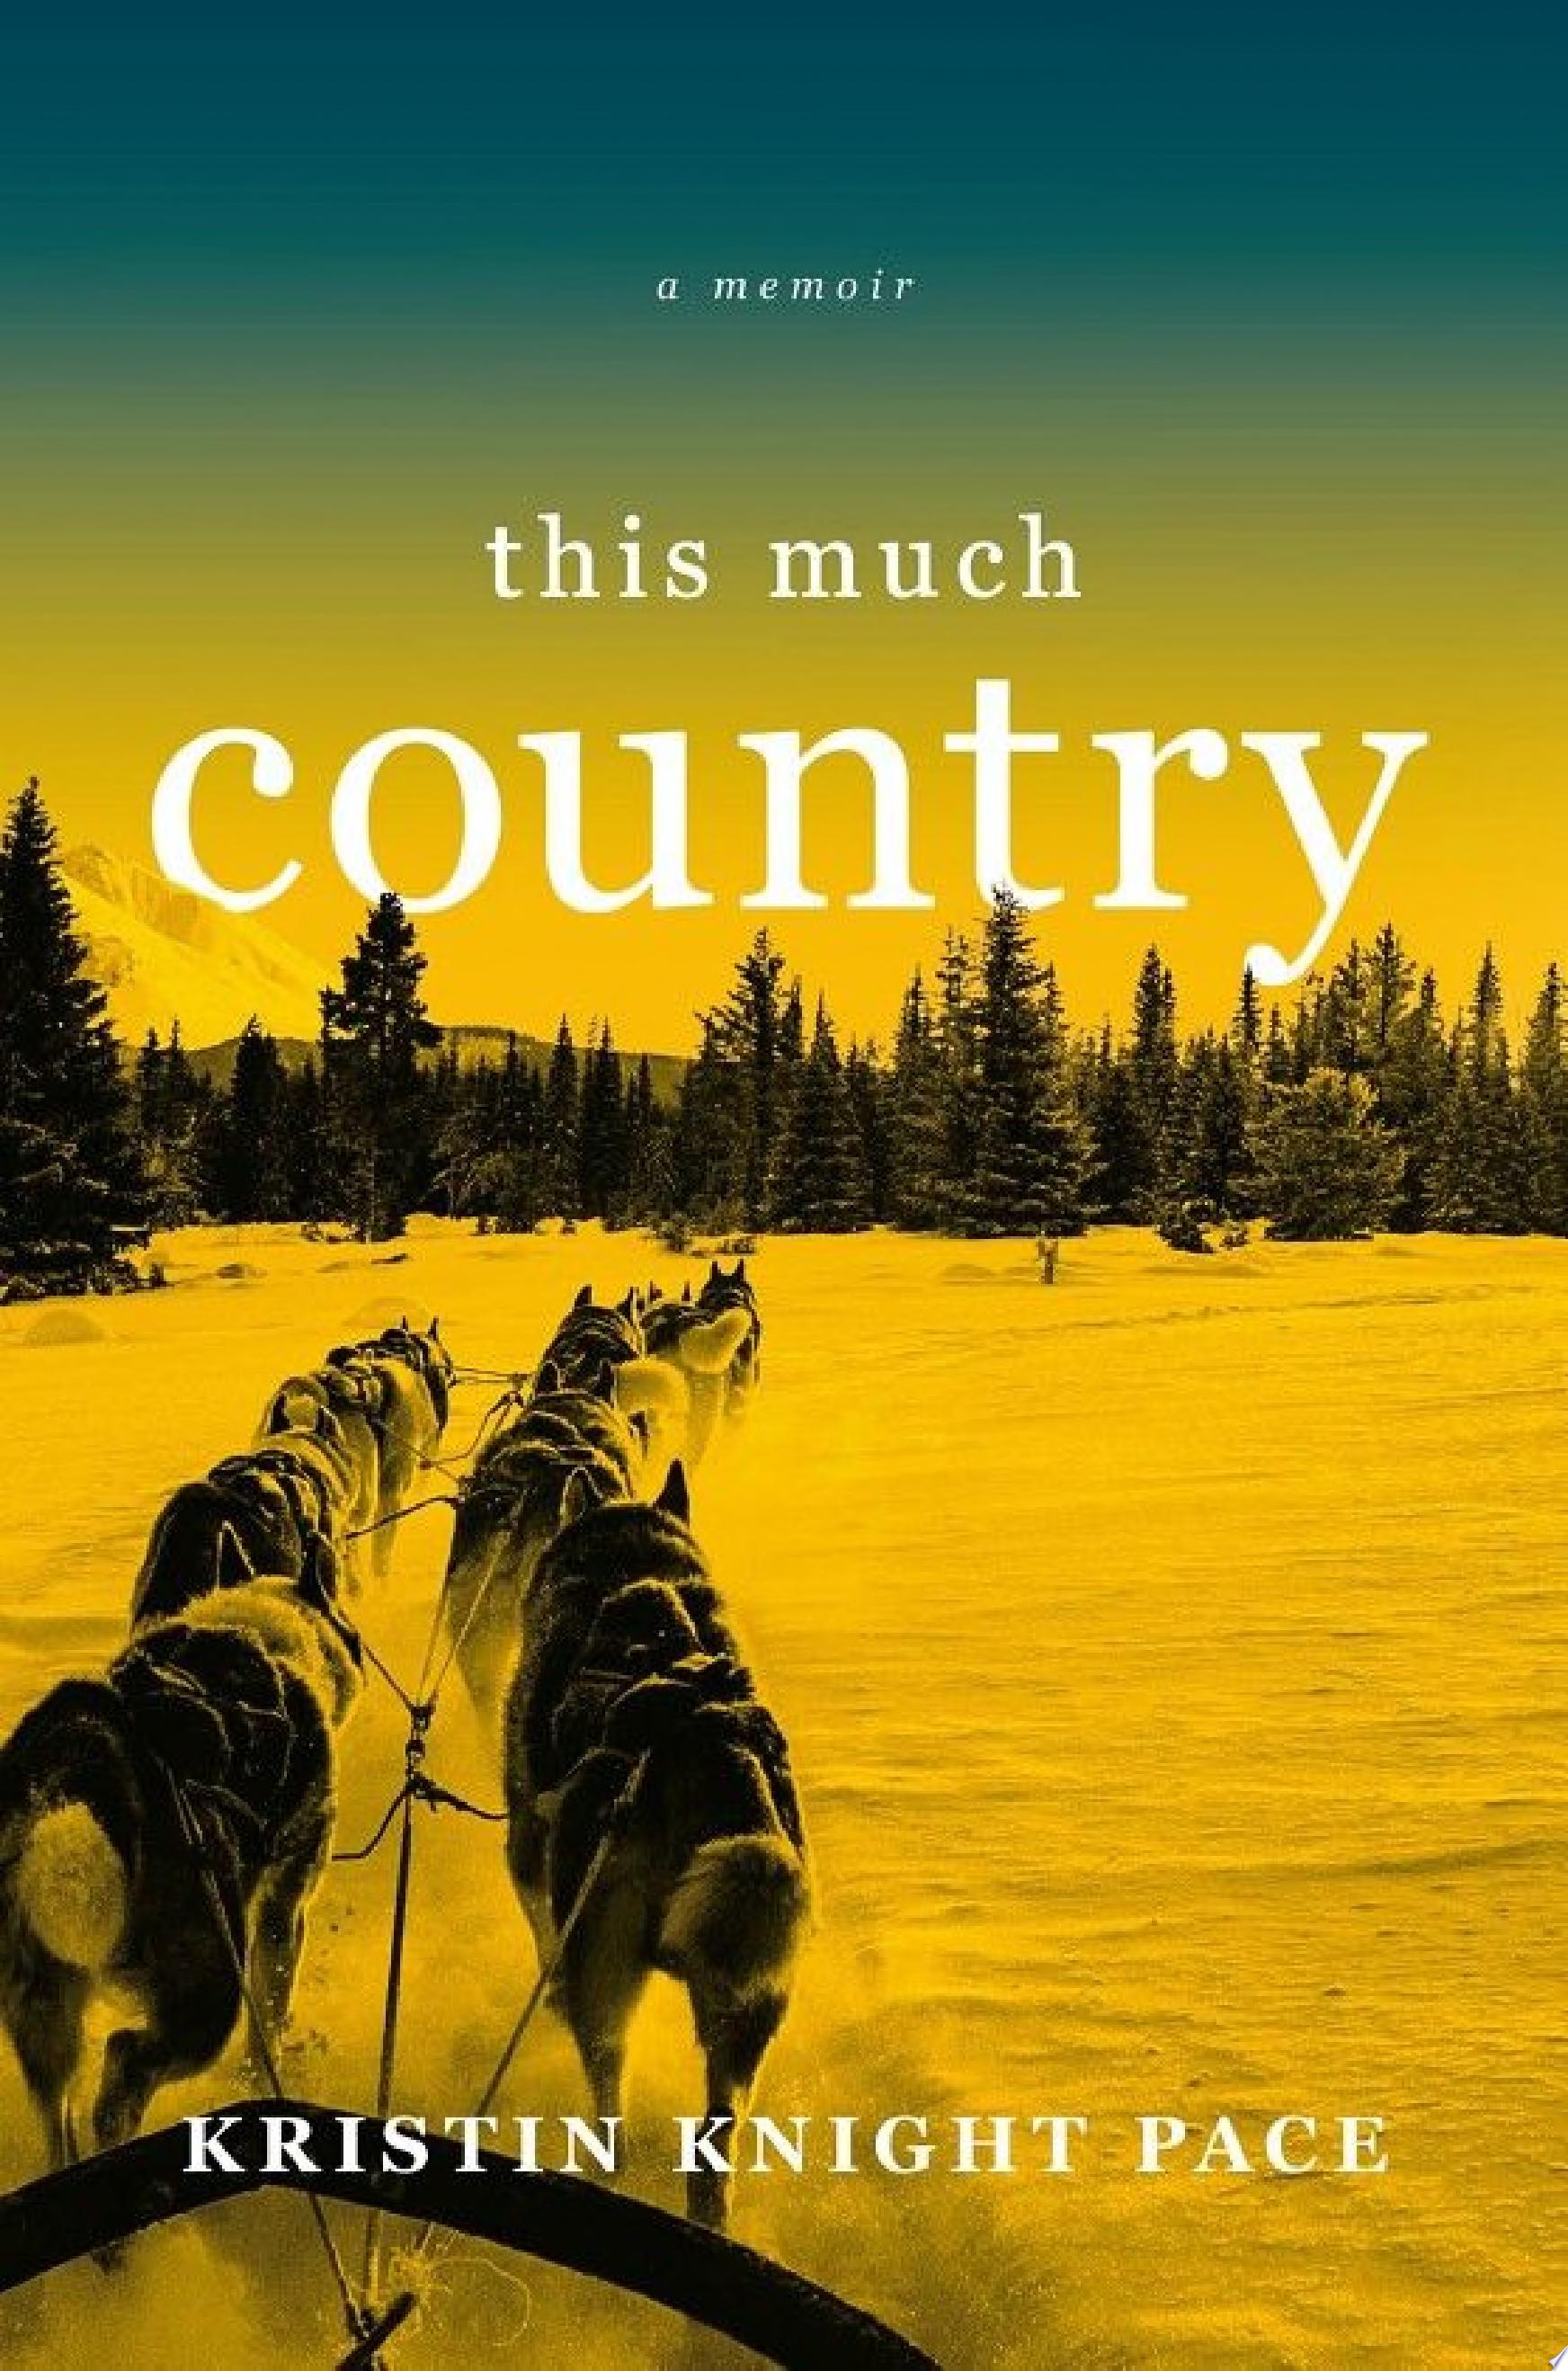 Image for "This Much Country"